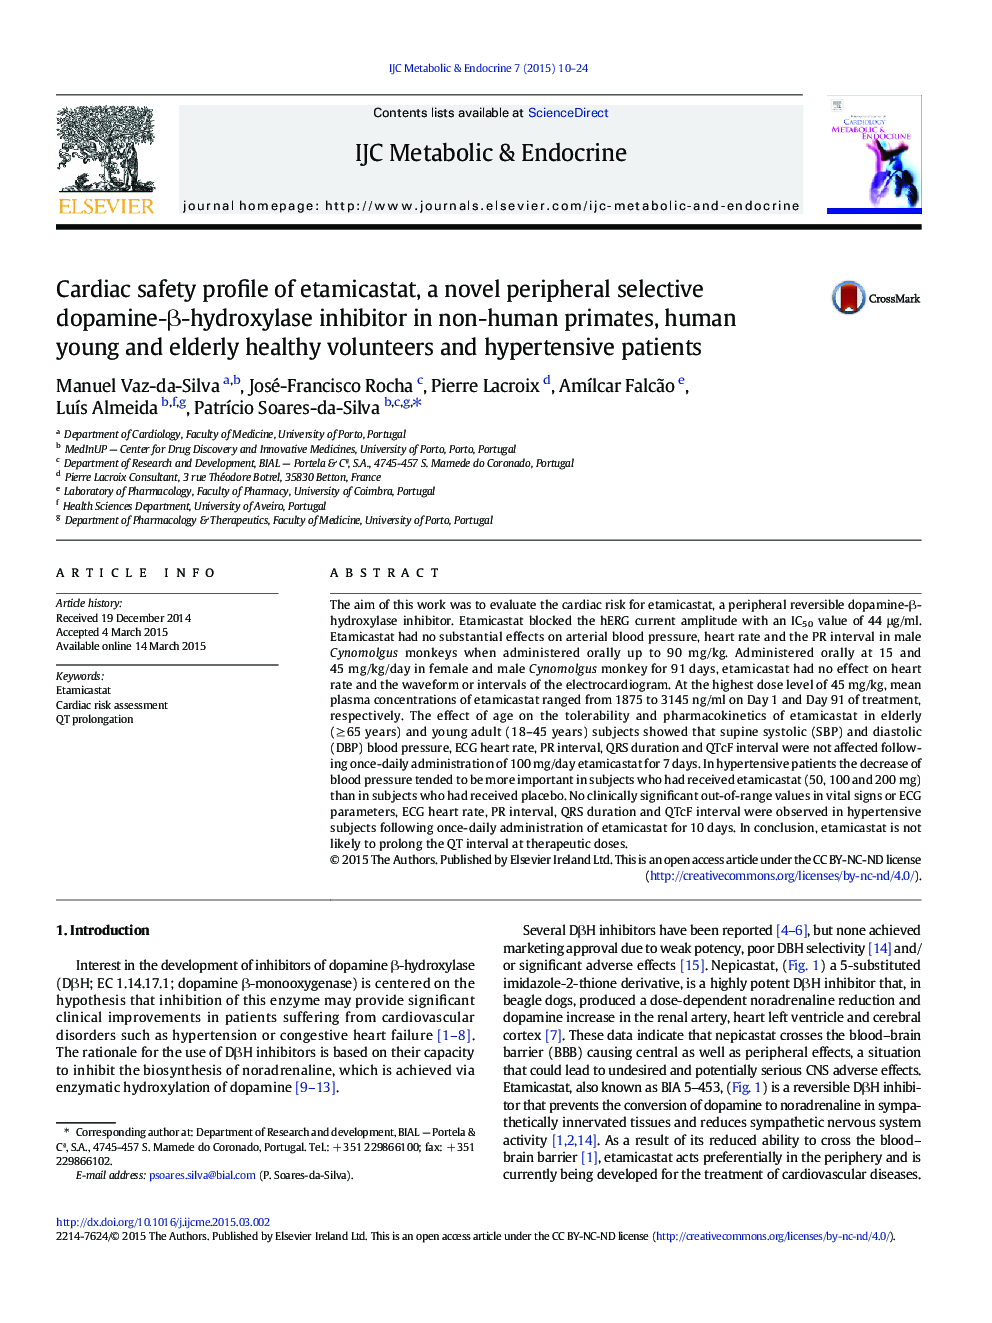 Cardiac safety profile of etamicastat, a novel peripheral selective dopamine-β-hydroxylase inhibitor in non-human primates, human young and elderly healthy volunteers and hypertensive patients